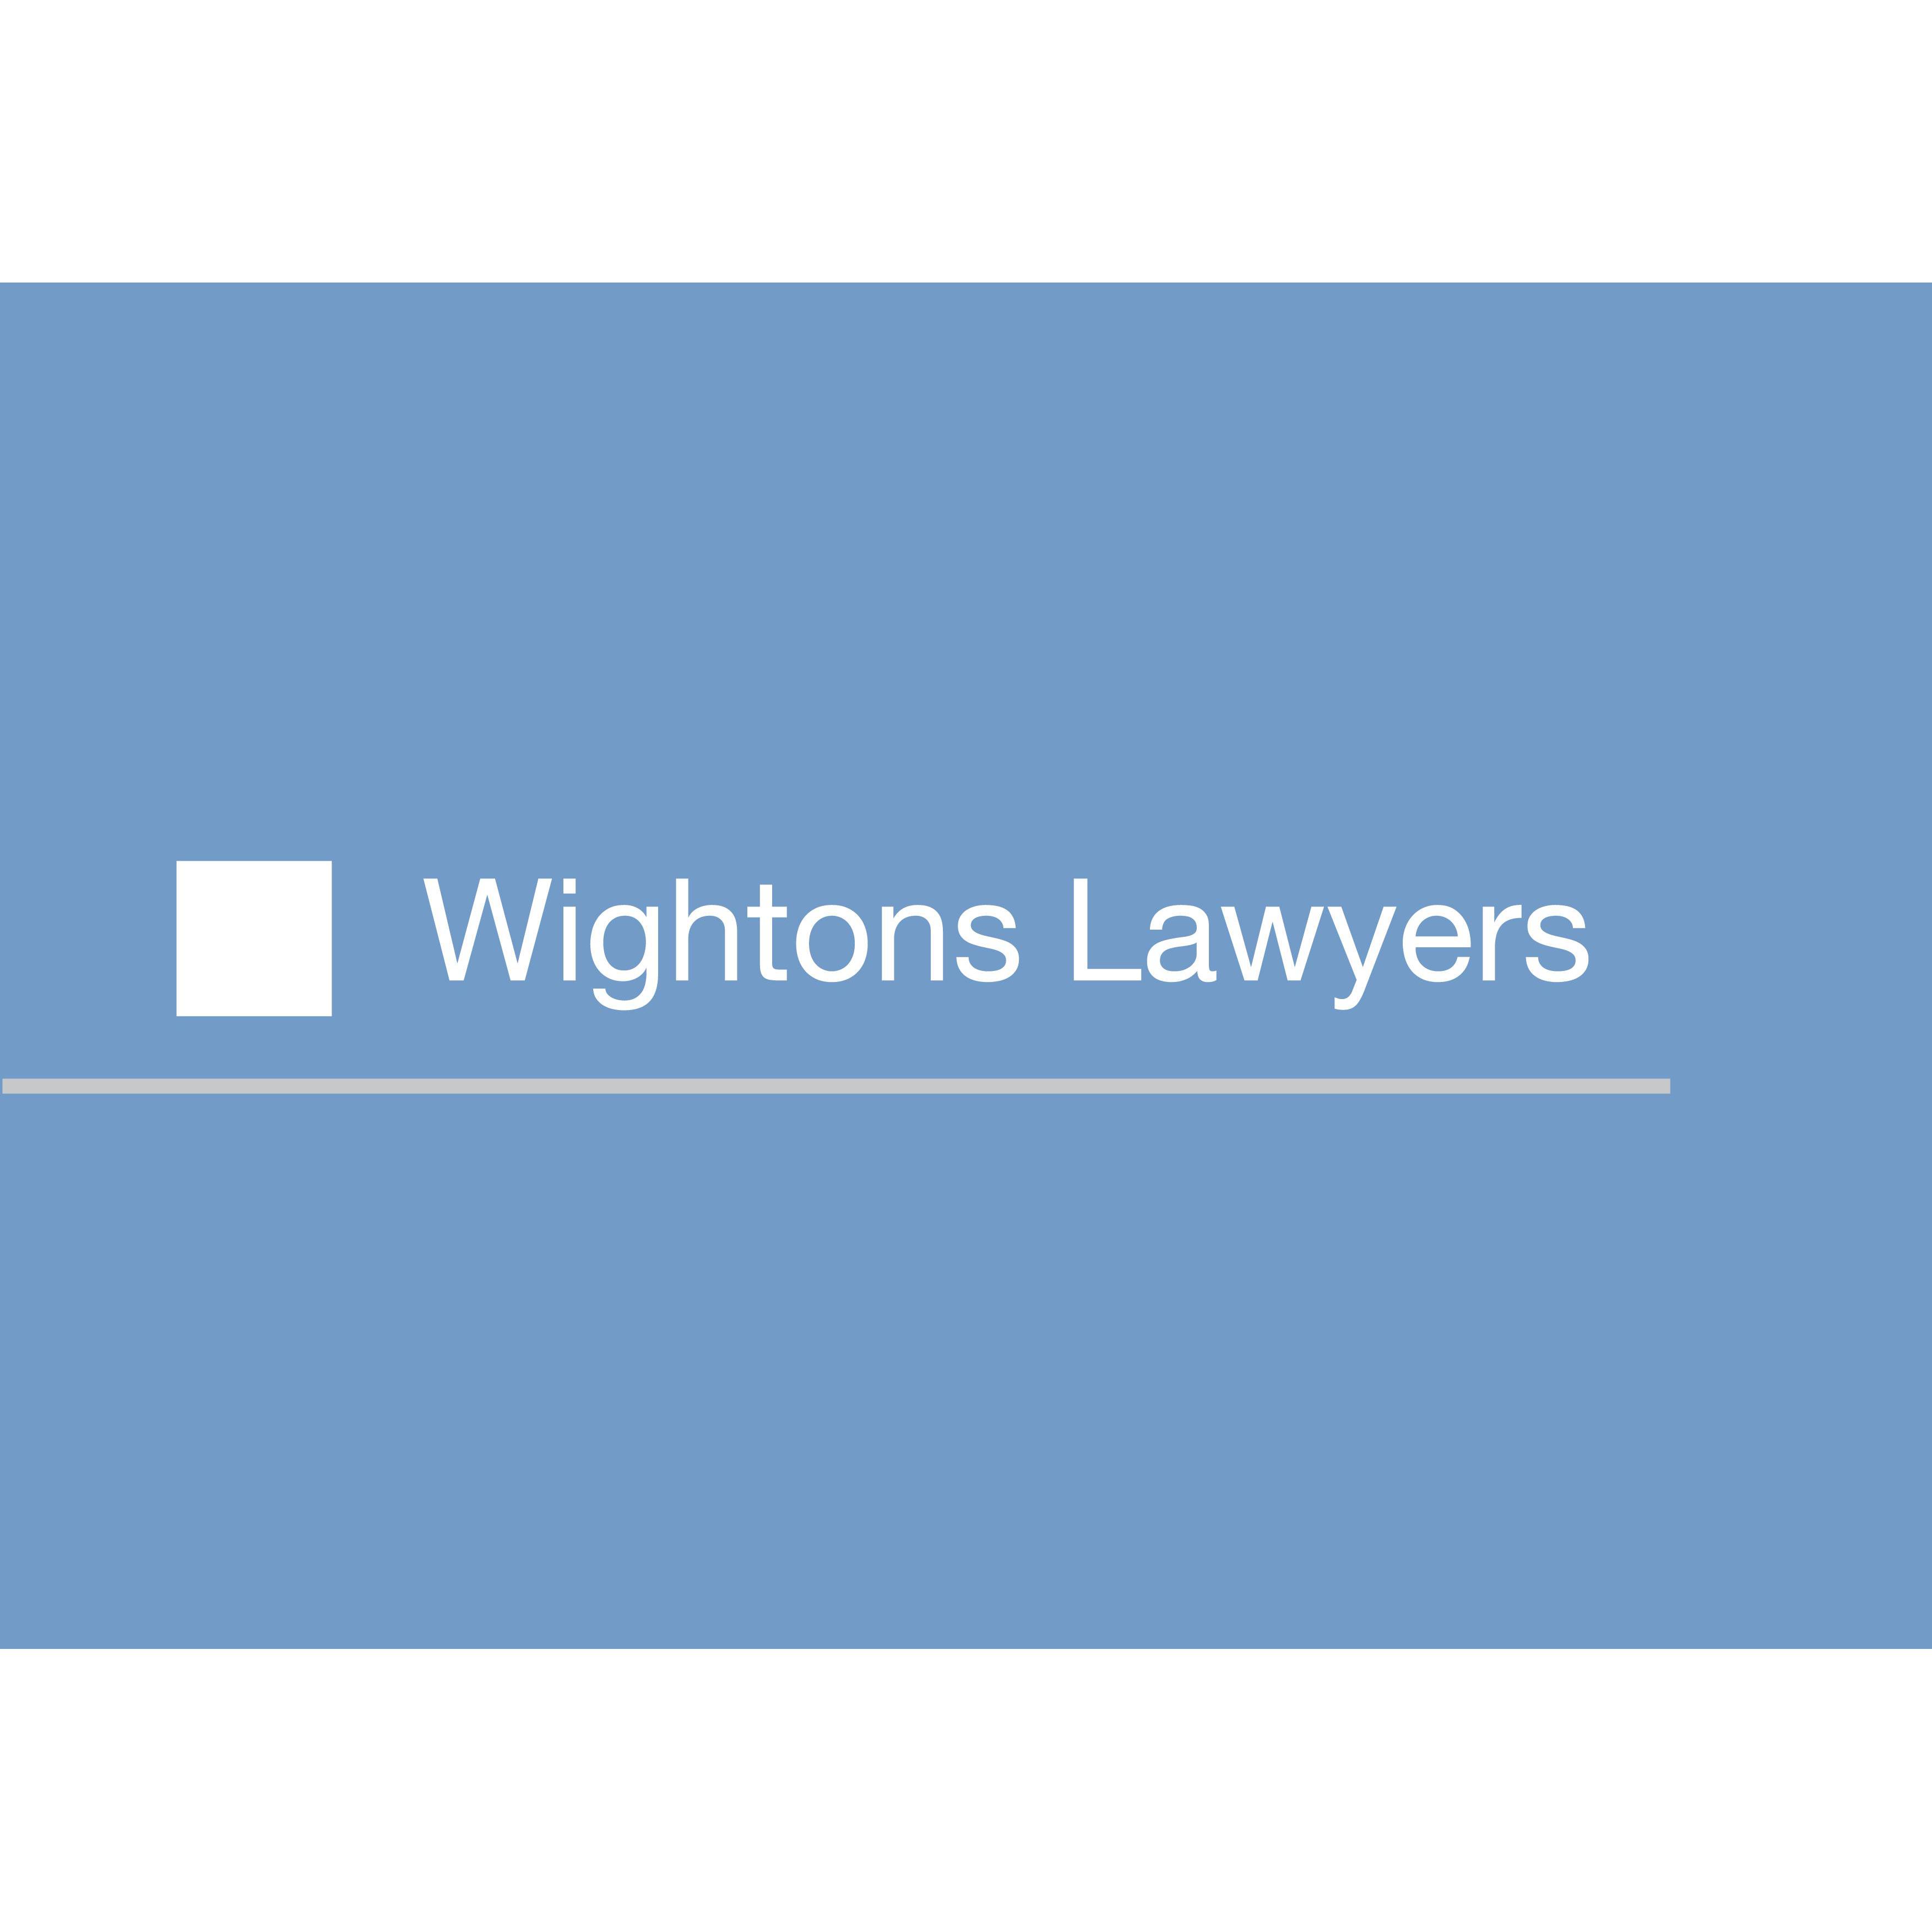 Wightons Lawyers - Geelong, VIC 3220 - (03) 5221 8777 | ShowMeLocal.com